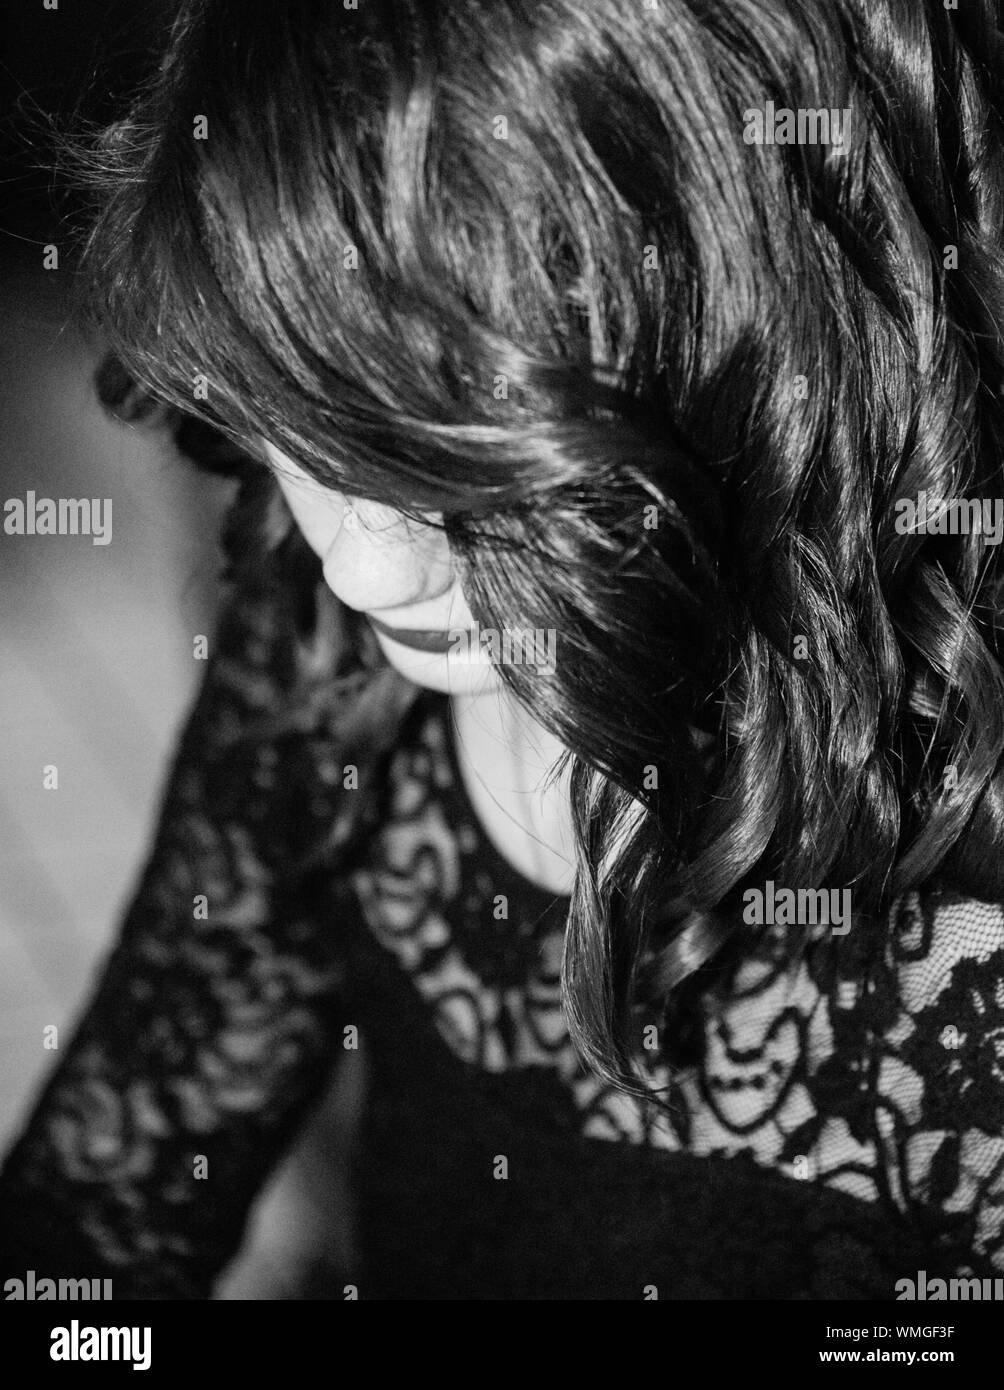 Close-up Of Woman Face Covered With Medium-length Hair Stock Photo